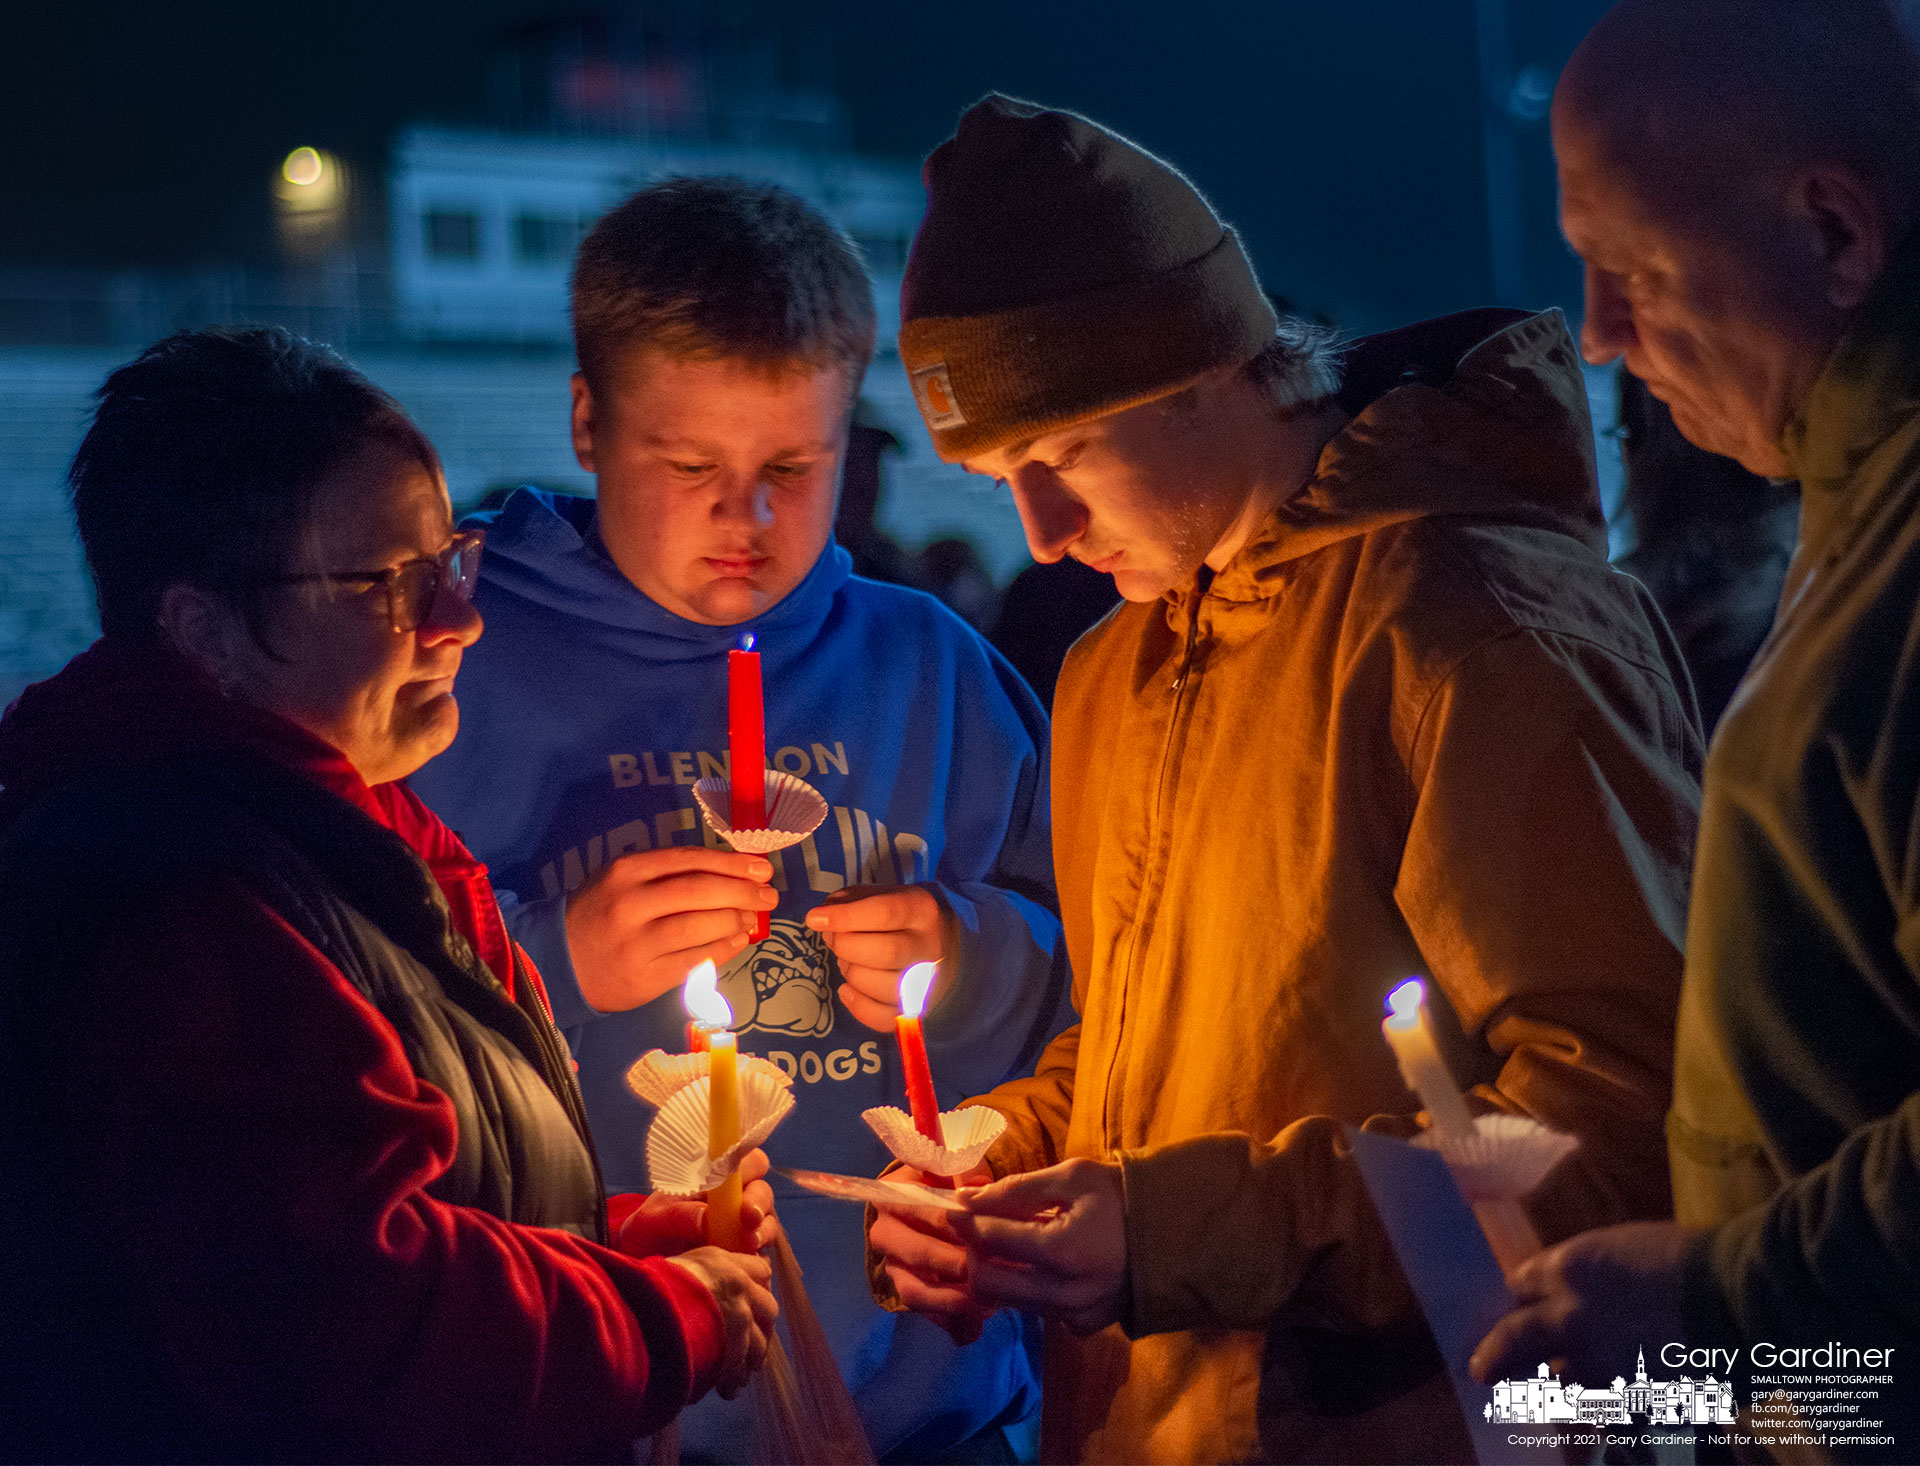 Friends and family gathered at the Westerville South football stadium for a candlelight service to remember Zak Crum, an alumnus of the school who died last week. My Final Photo for Dec. 30, 2021.